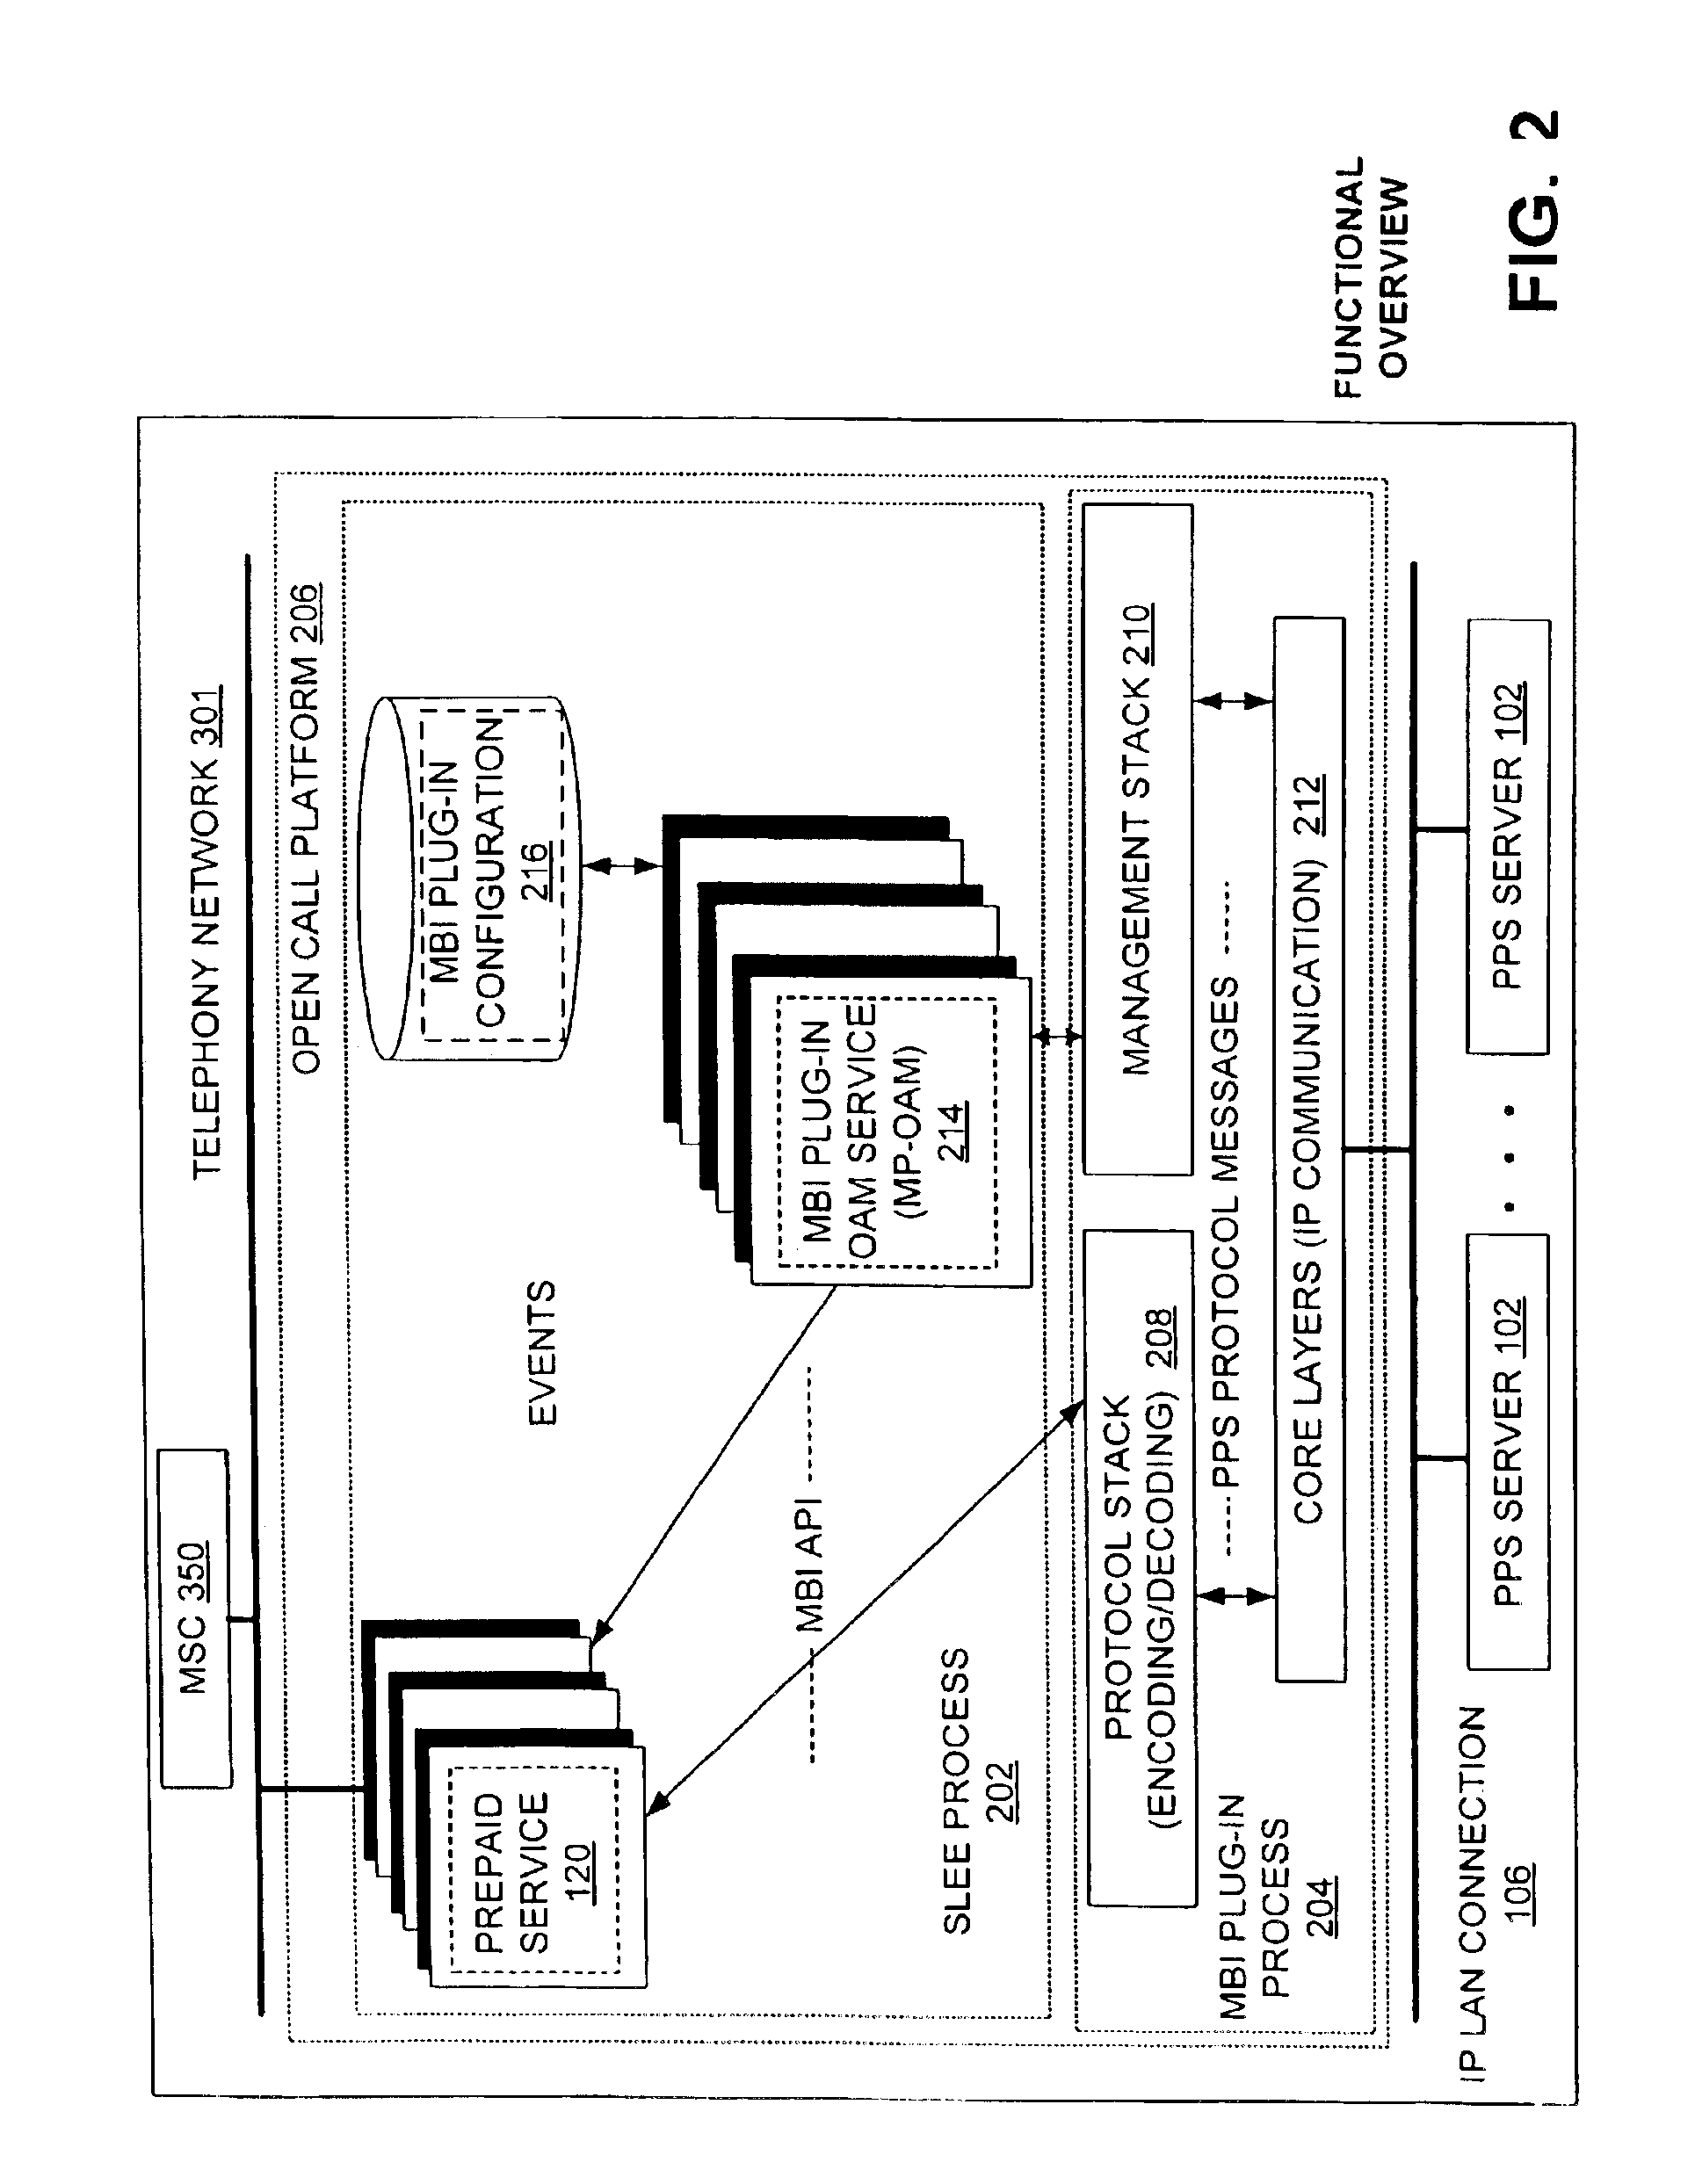 Apparatus and method for telecommunications services